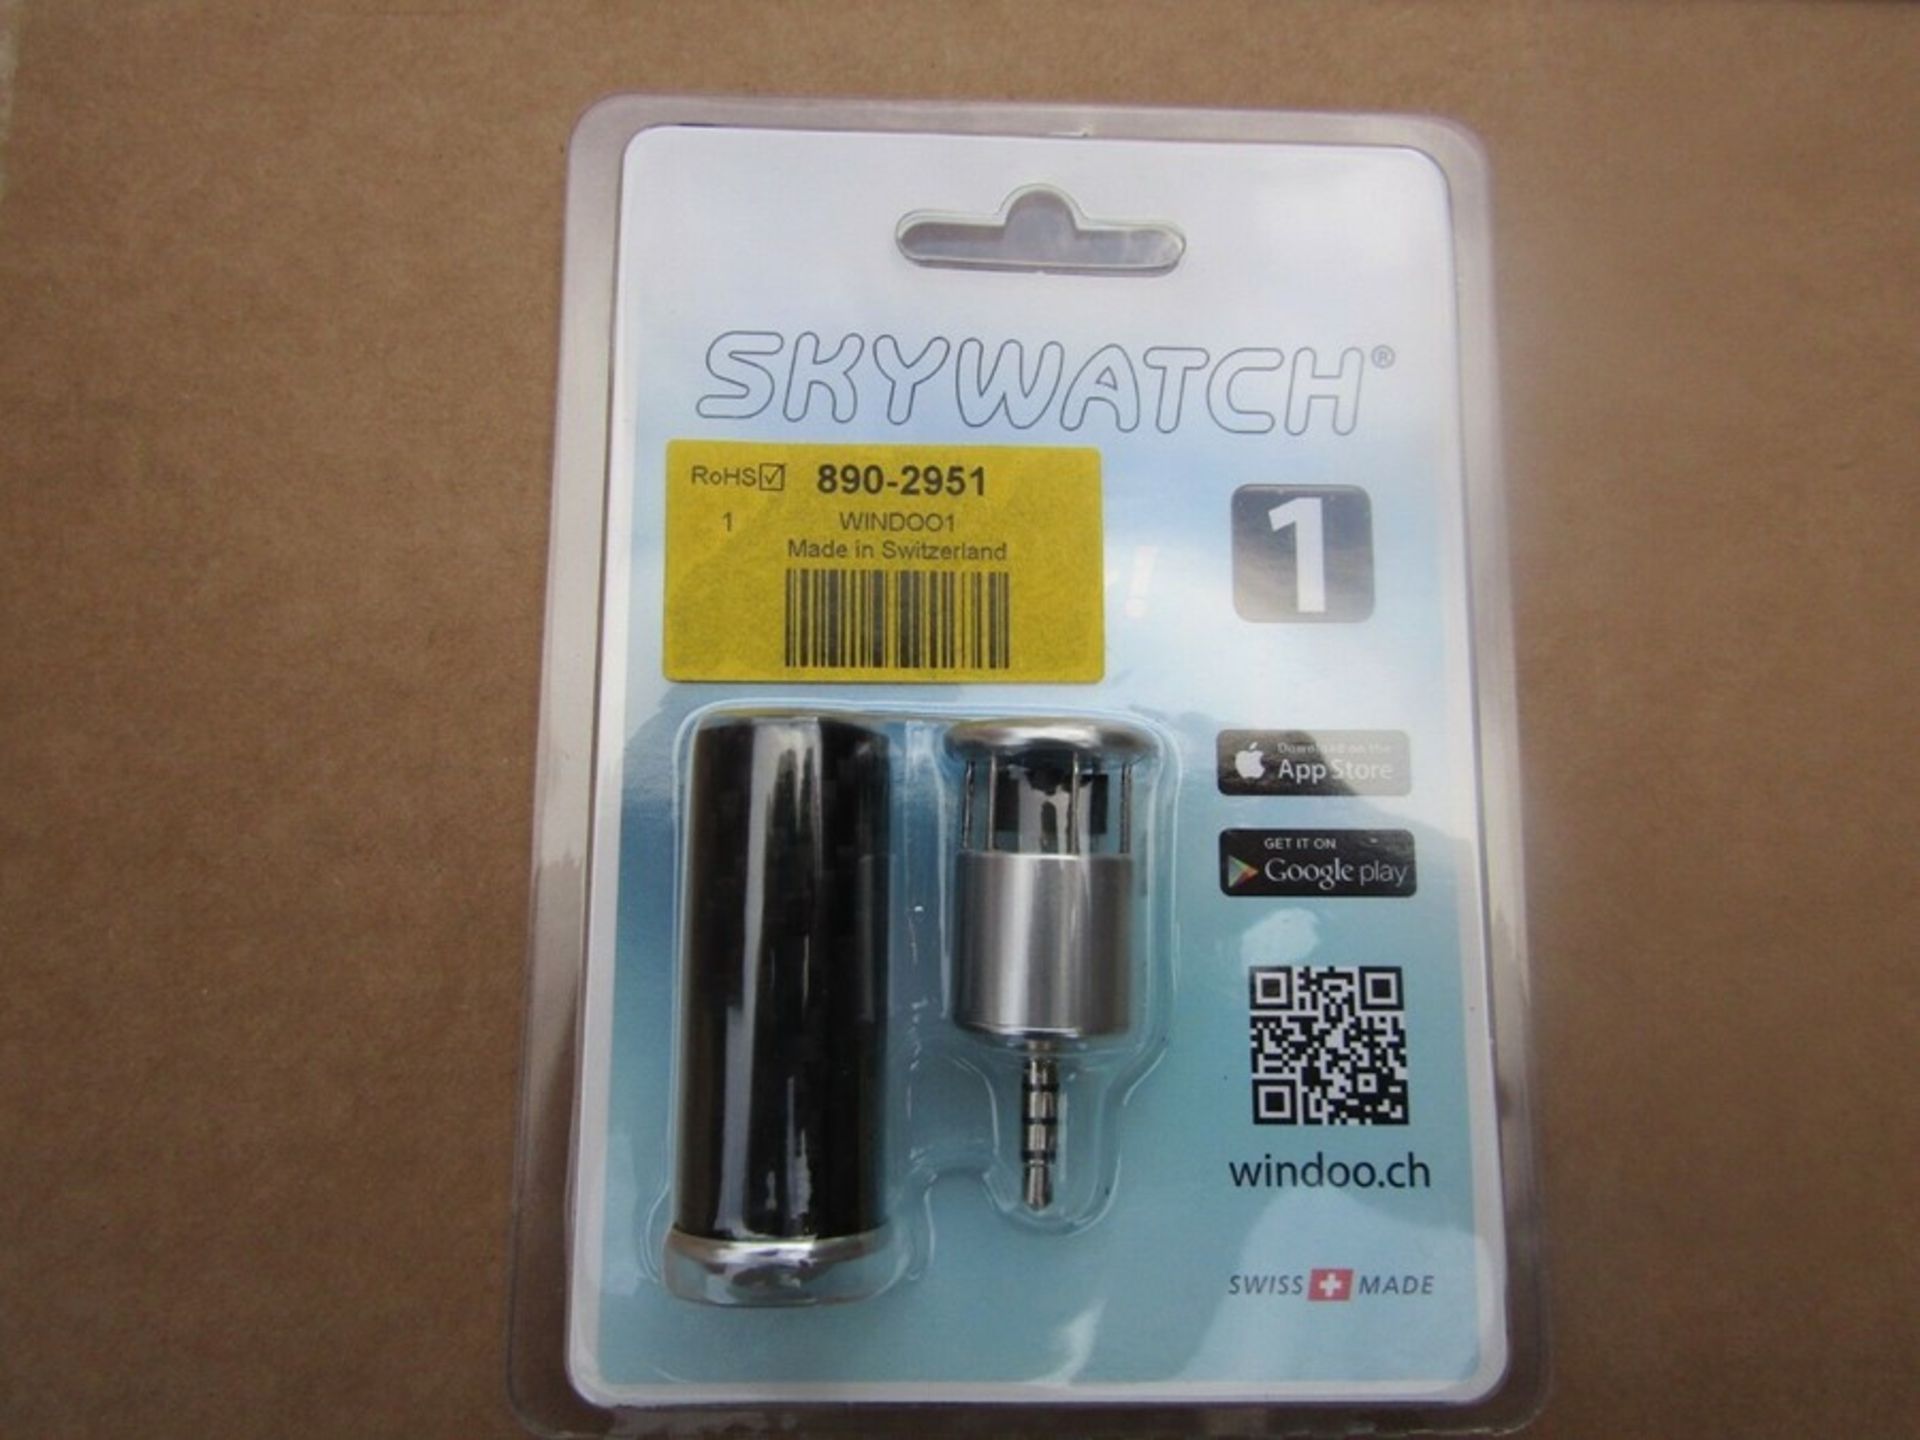 10 x Skywatch Windoo 1 Anemometer Thermometer for Smartphone